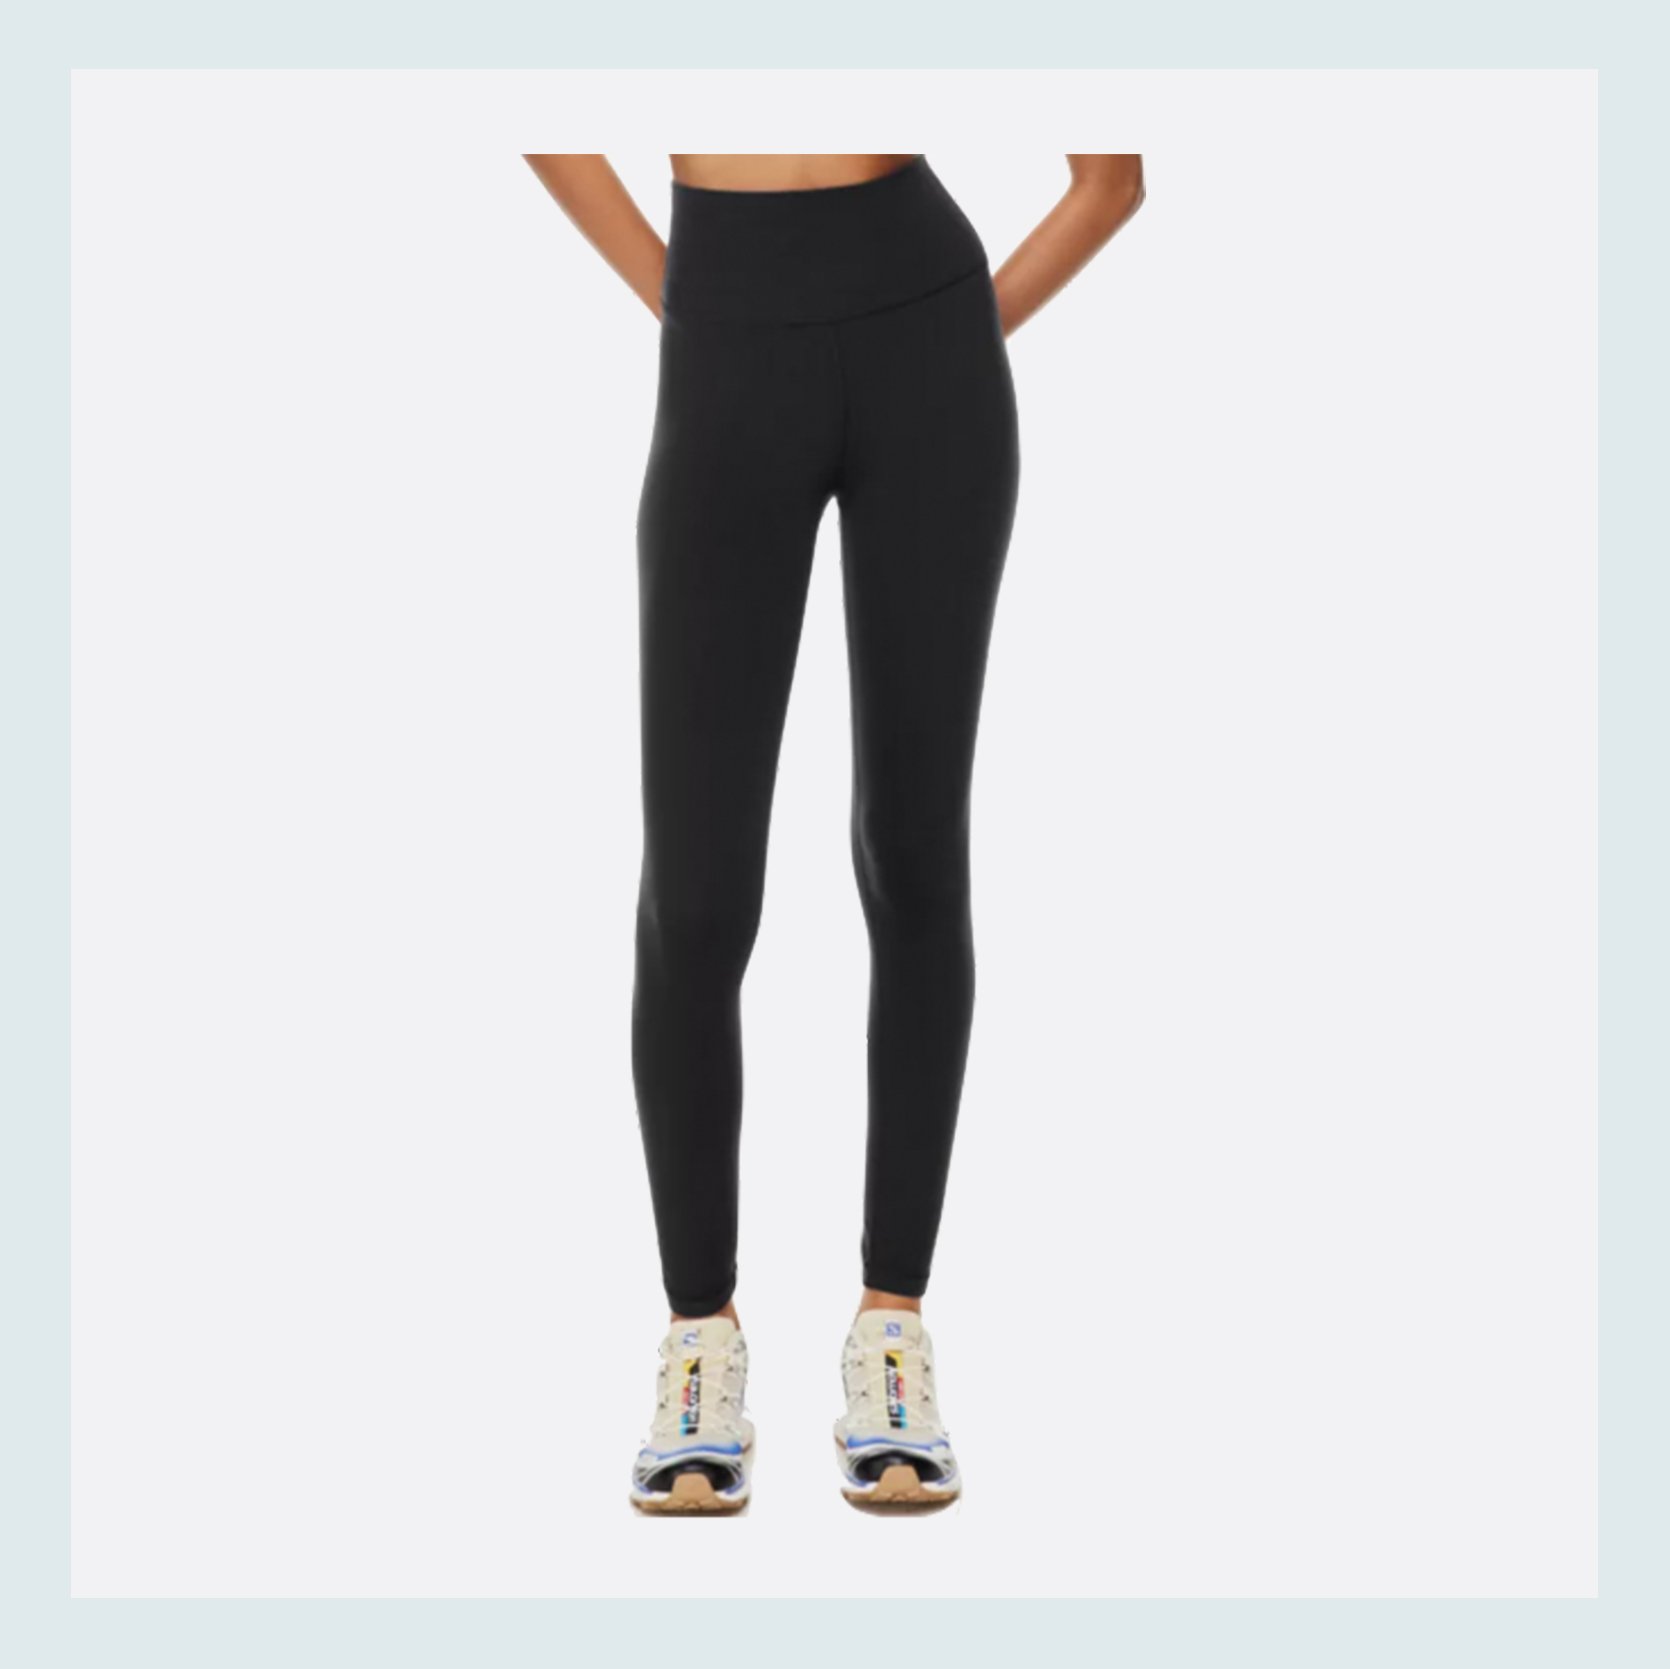 Leggings Review: In Search Of The Perfect Leggings That Won't Slip